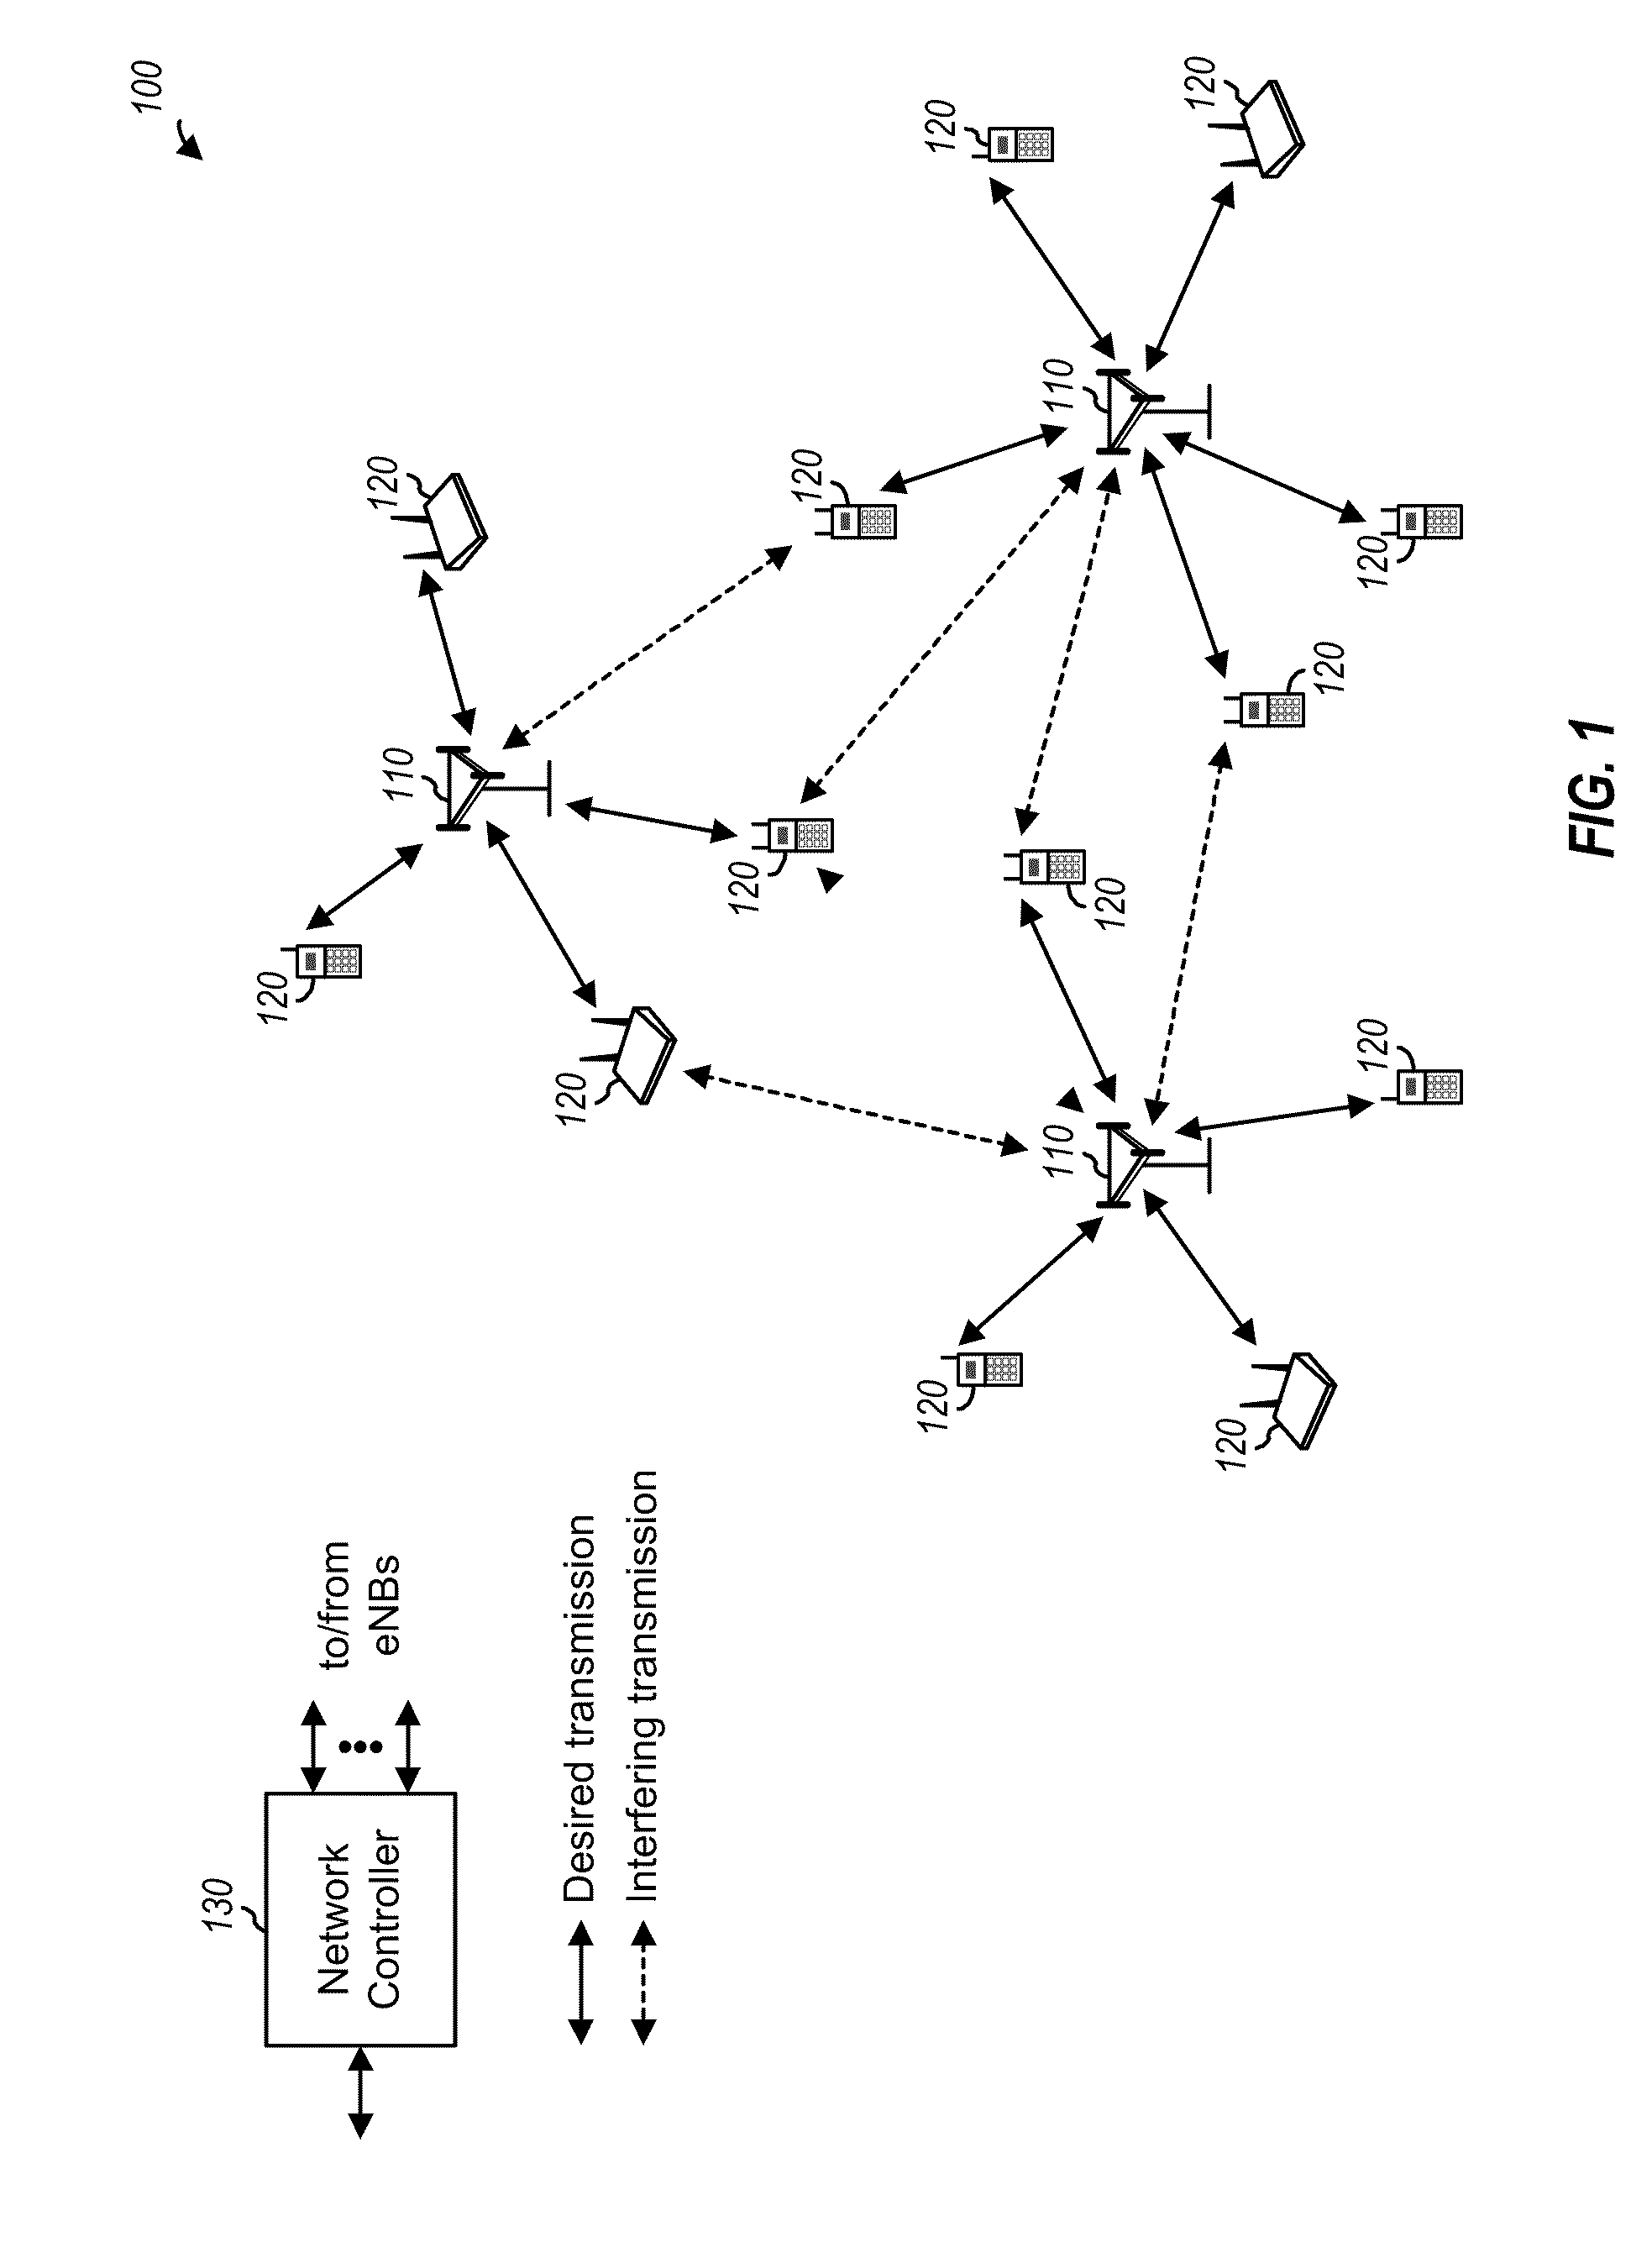 Interference mitigation for control channels in a wireless communication network